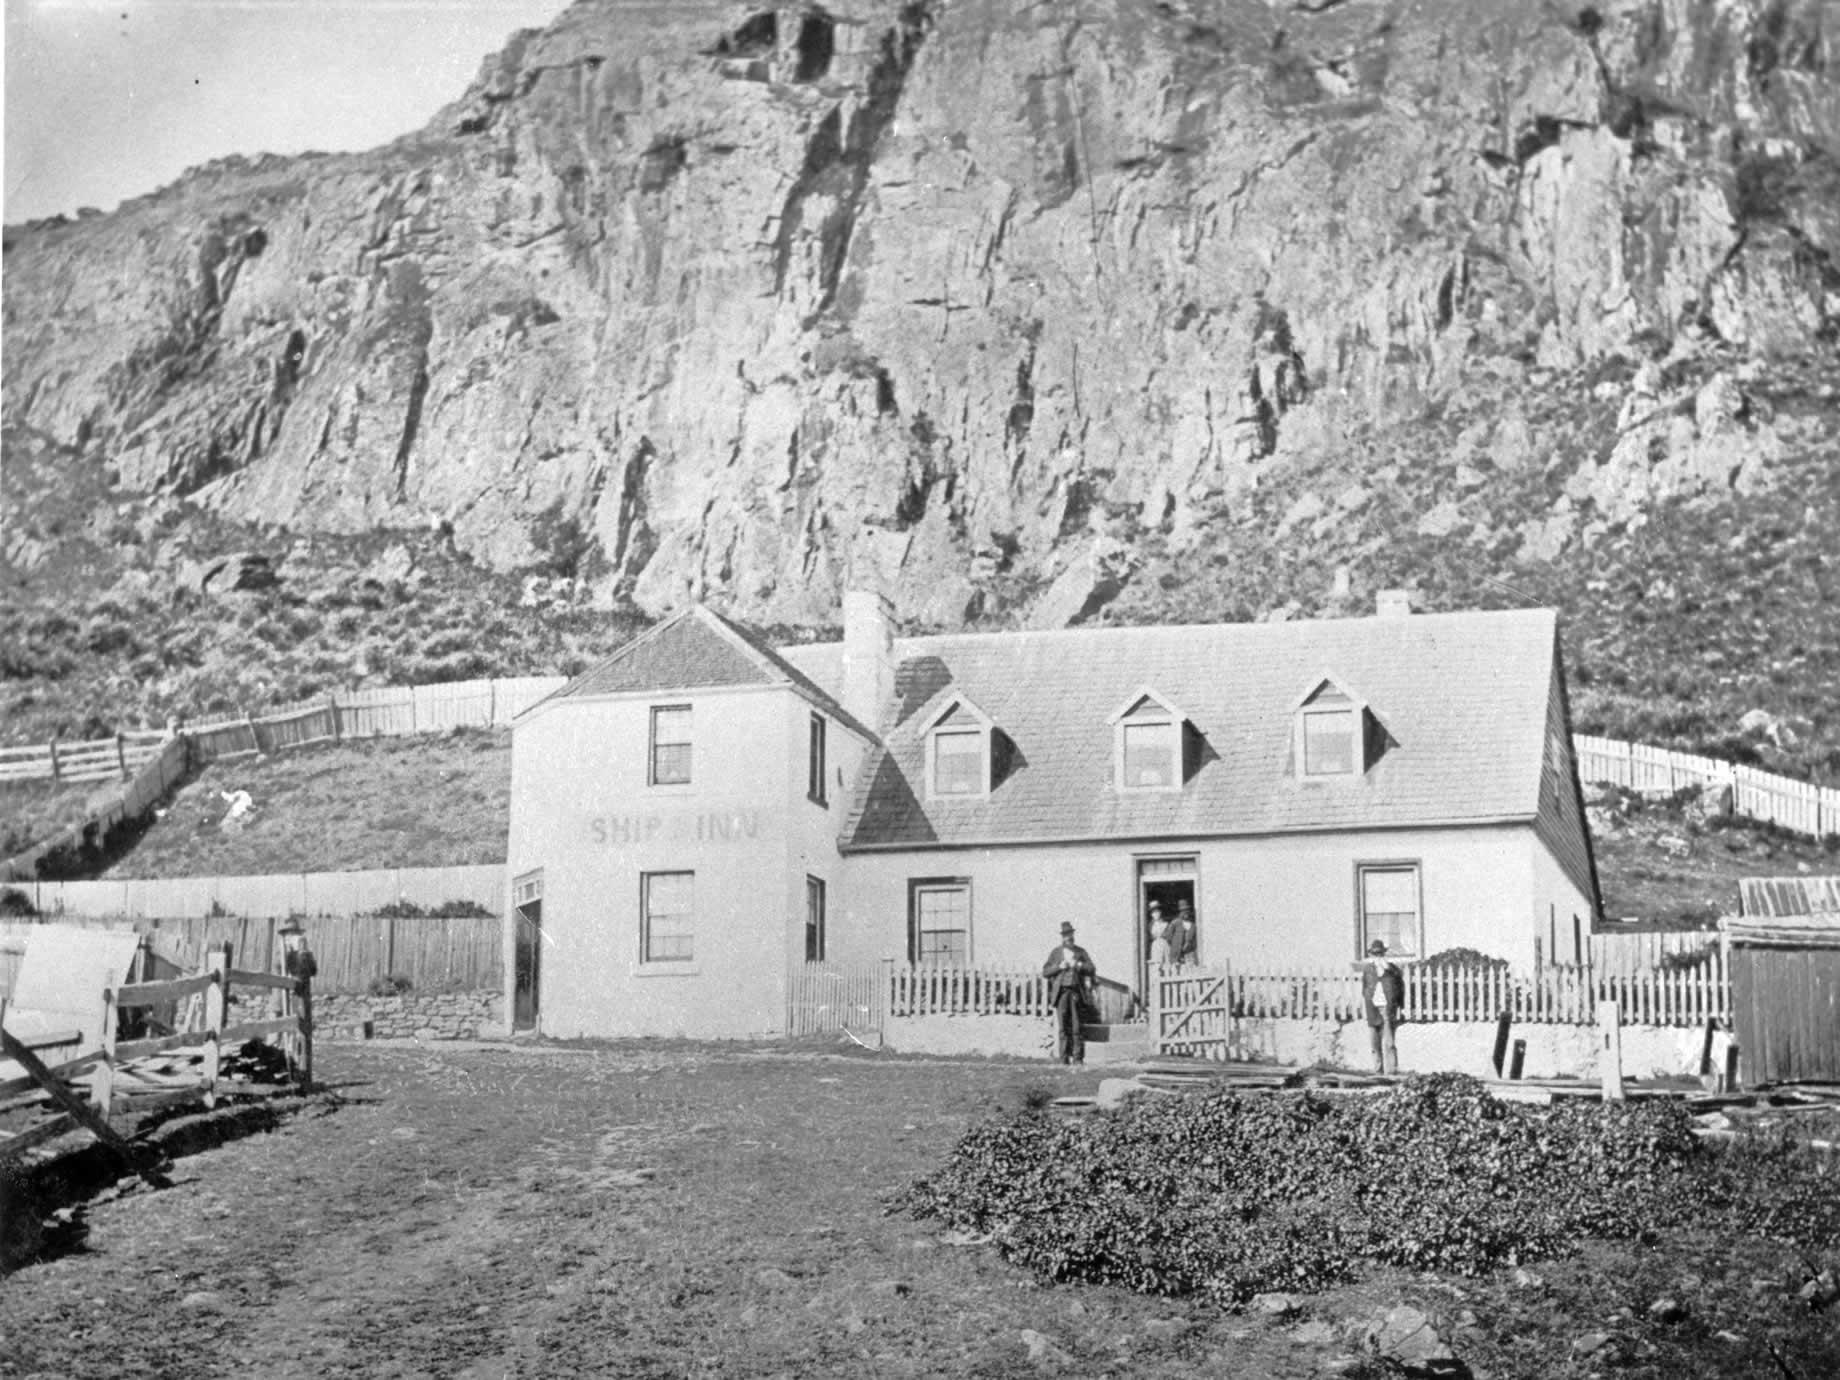 The Ship Inn, first licenced in 1849, which was sold in 1903 and renamed Bay View Hotel